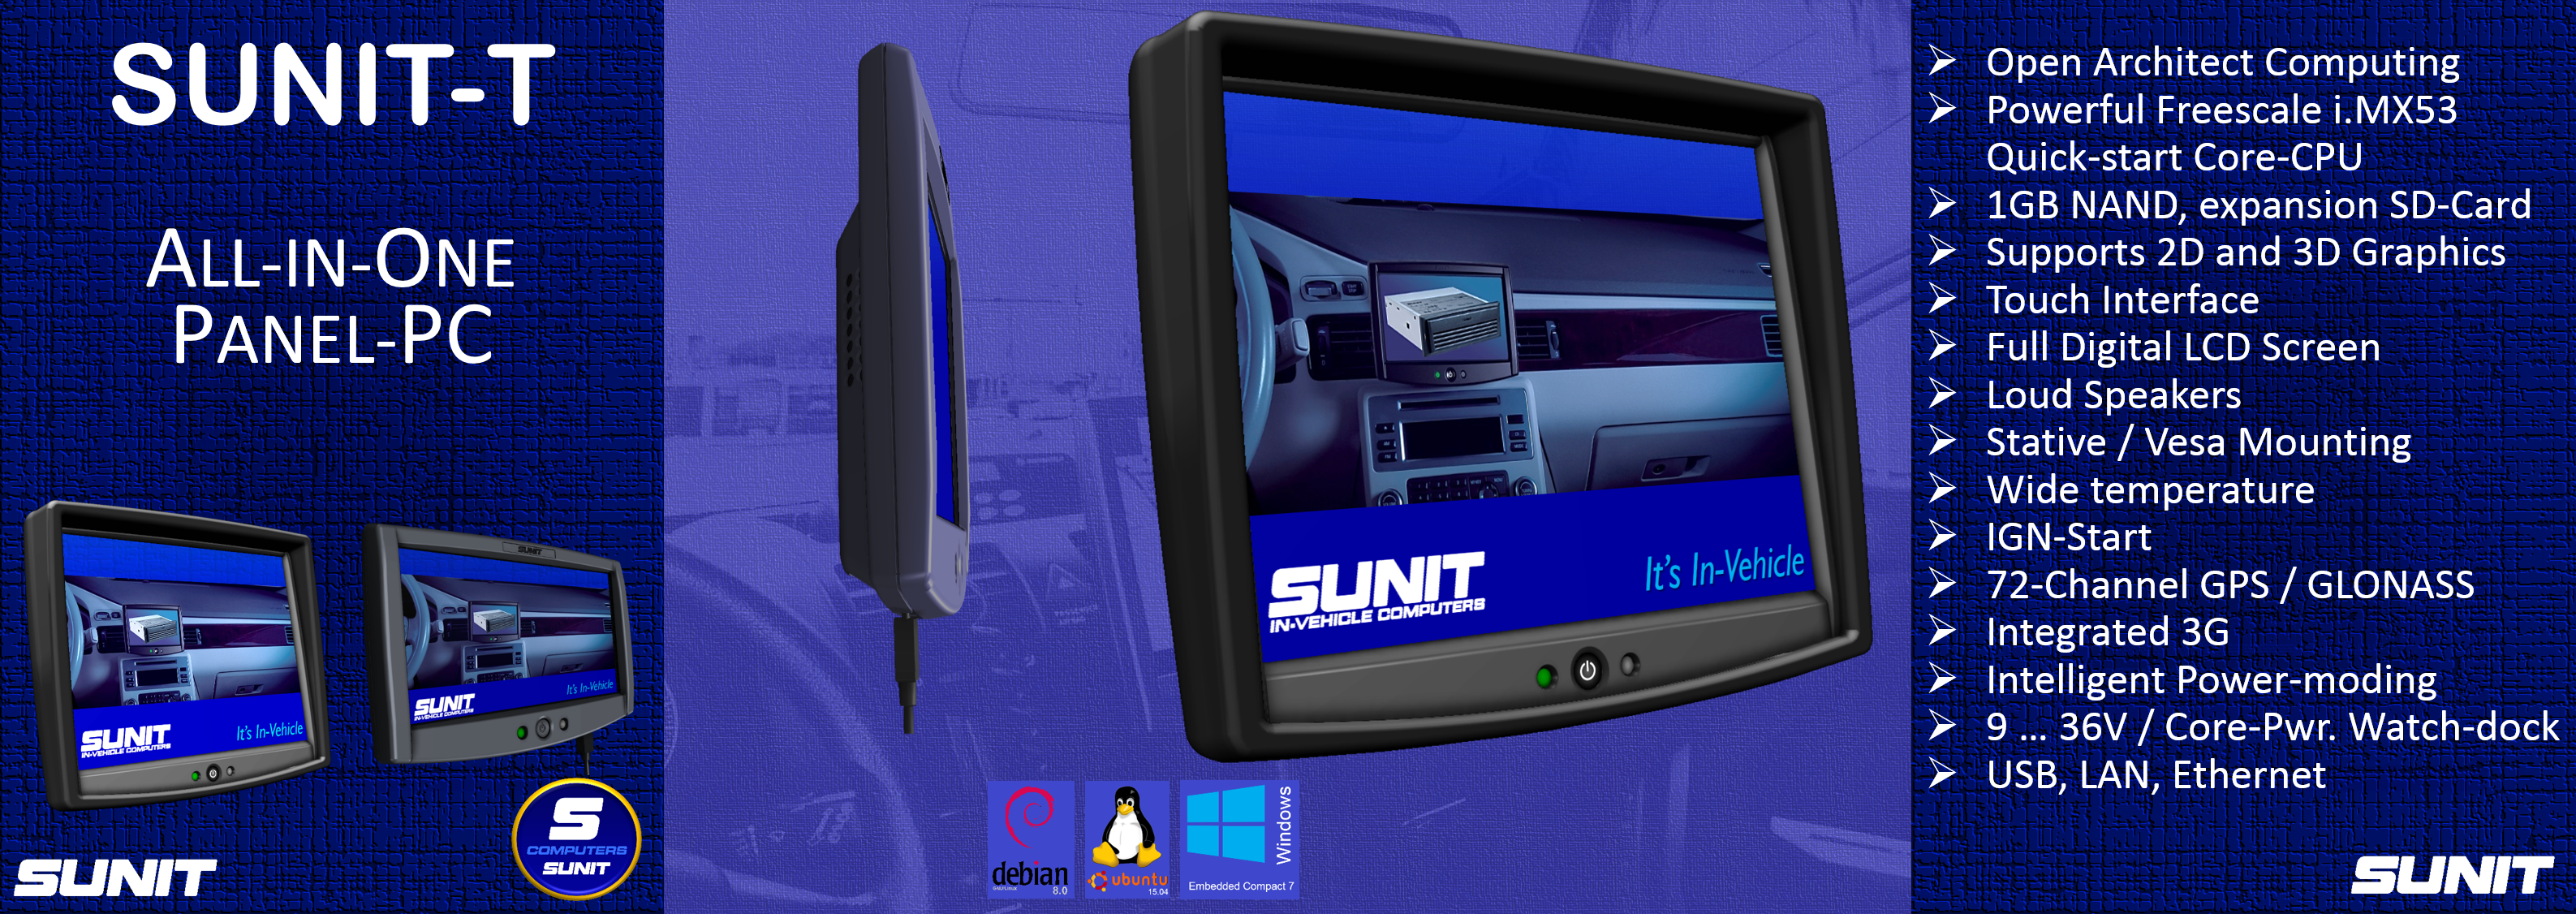 SUNIT-Tall-in-One Panel-PC for Industry and Fleet Management